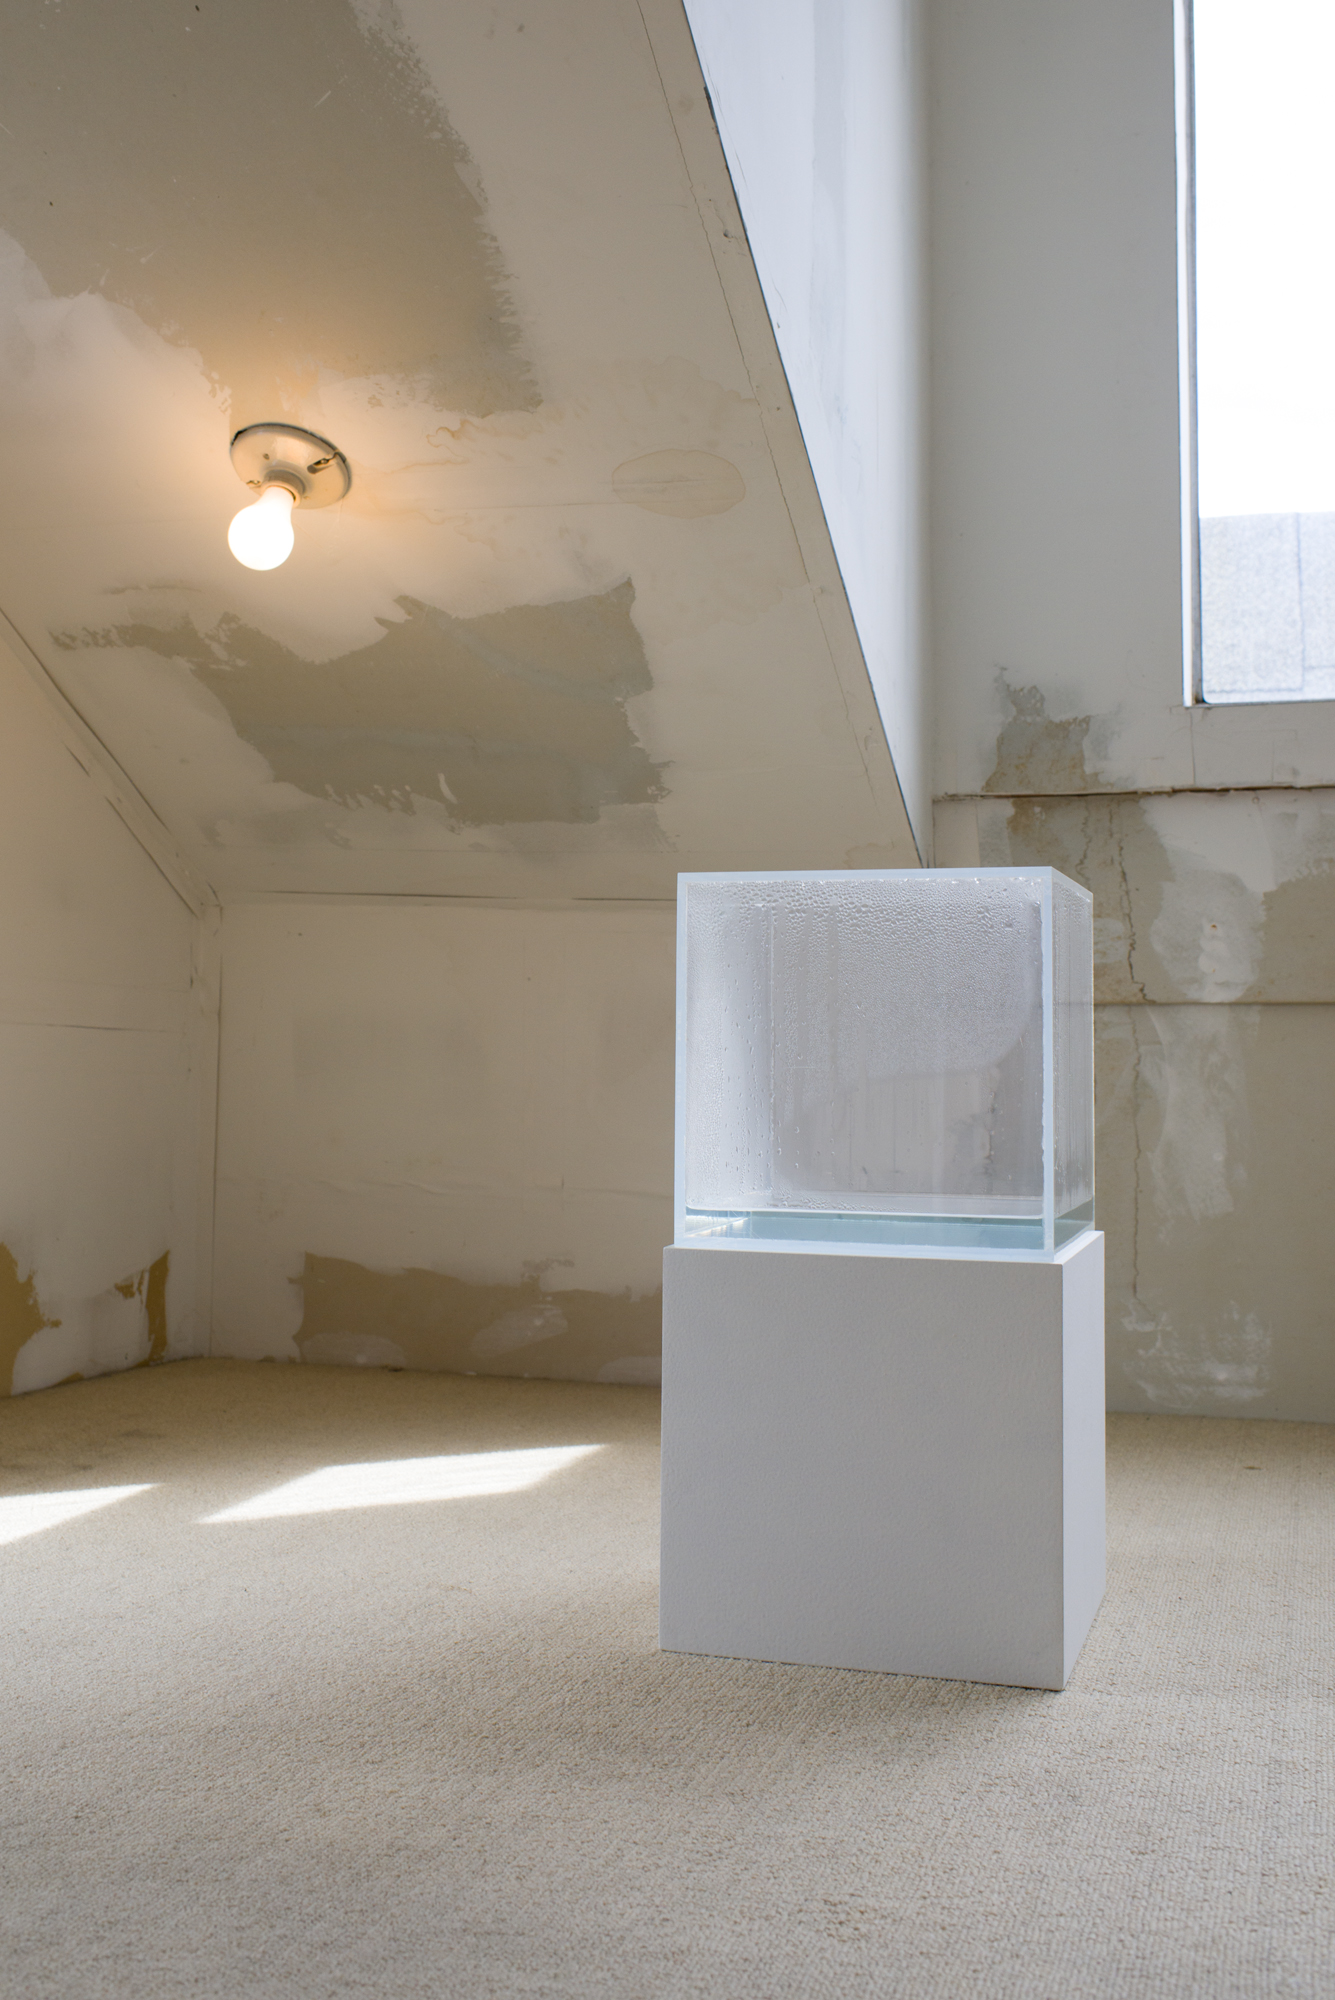  Hans Haacke,  Condensation Cube , 1971. Clear acrylic, distilled water, climate in area of display, 10 x 10 x 10 inches. Courtesy of the artist and Paula Cooper Gallery, New York. Private collection, San Francisco; Photo: Preston/Kalogiros; Courtesy